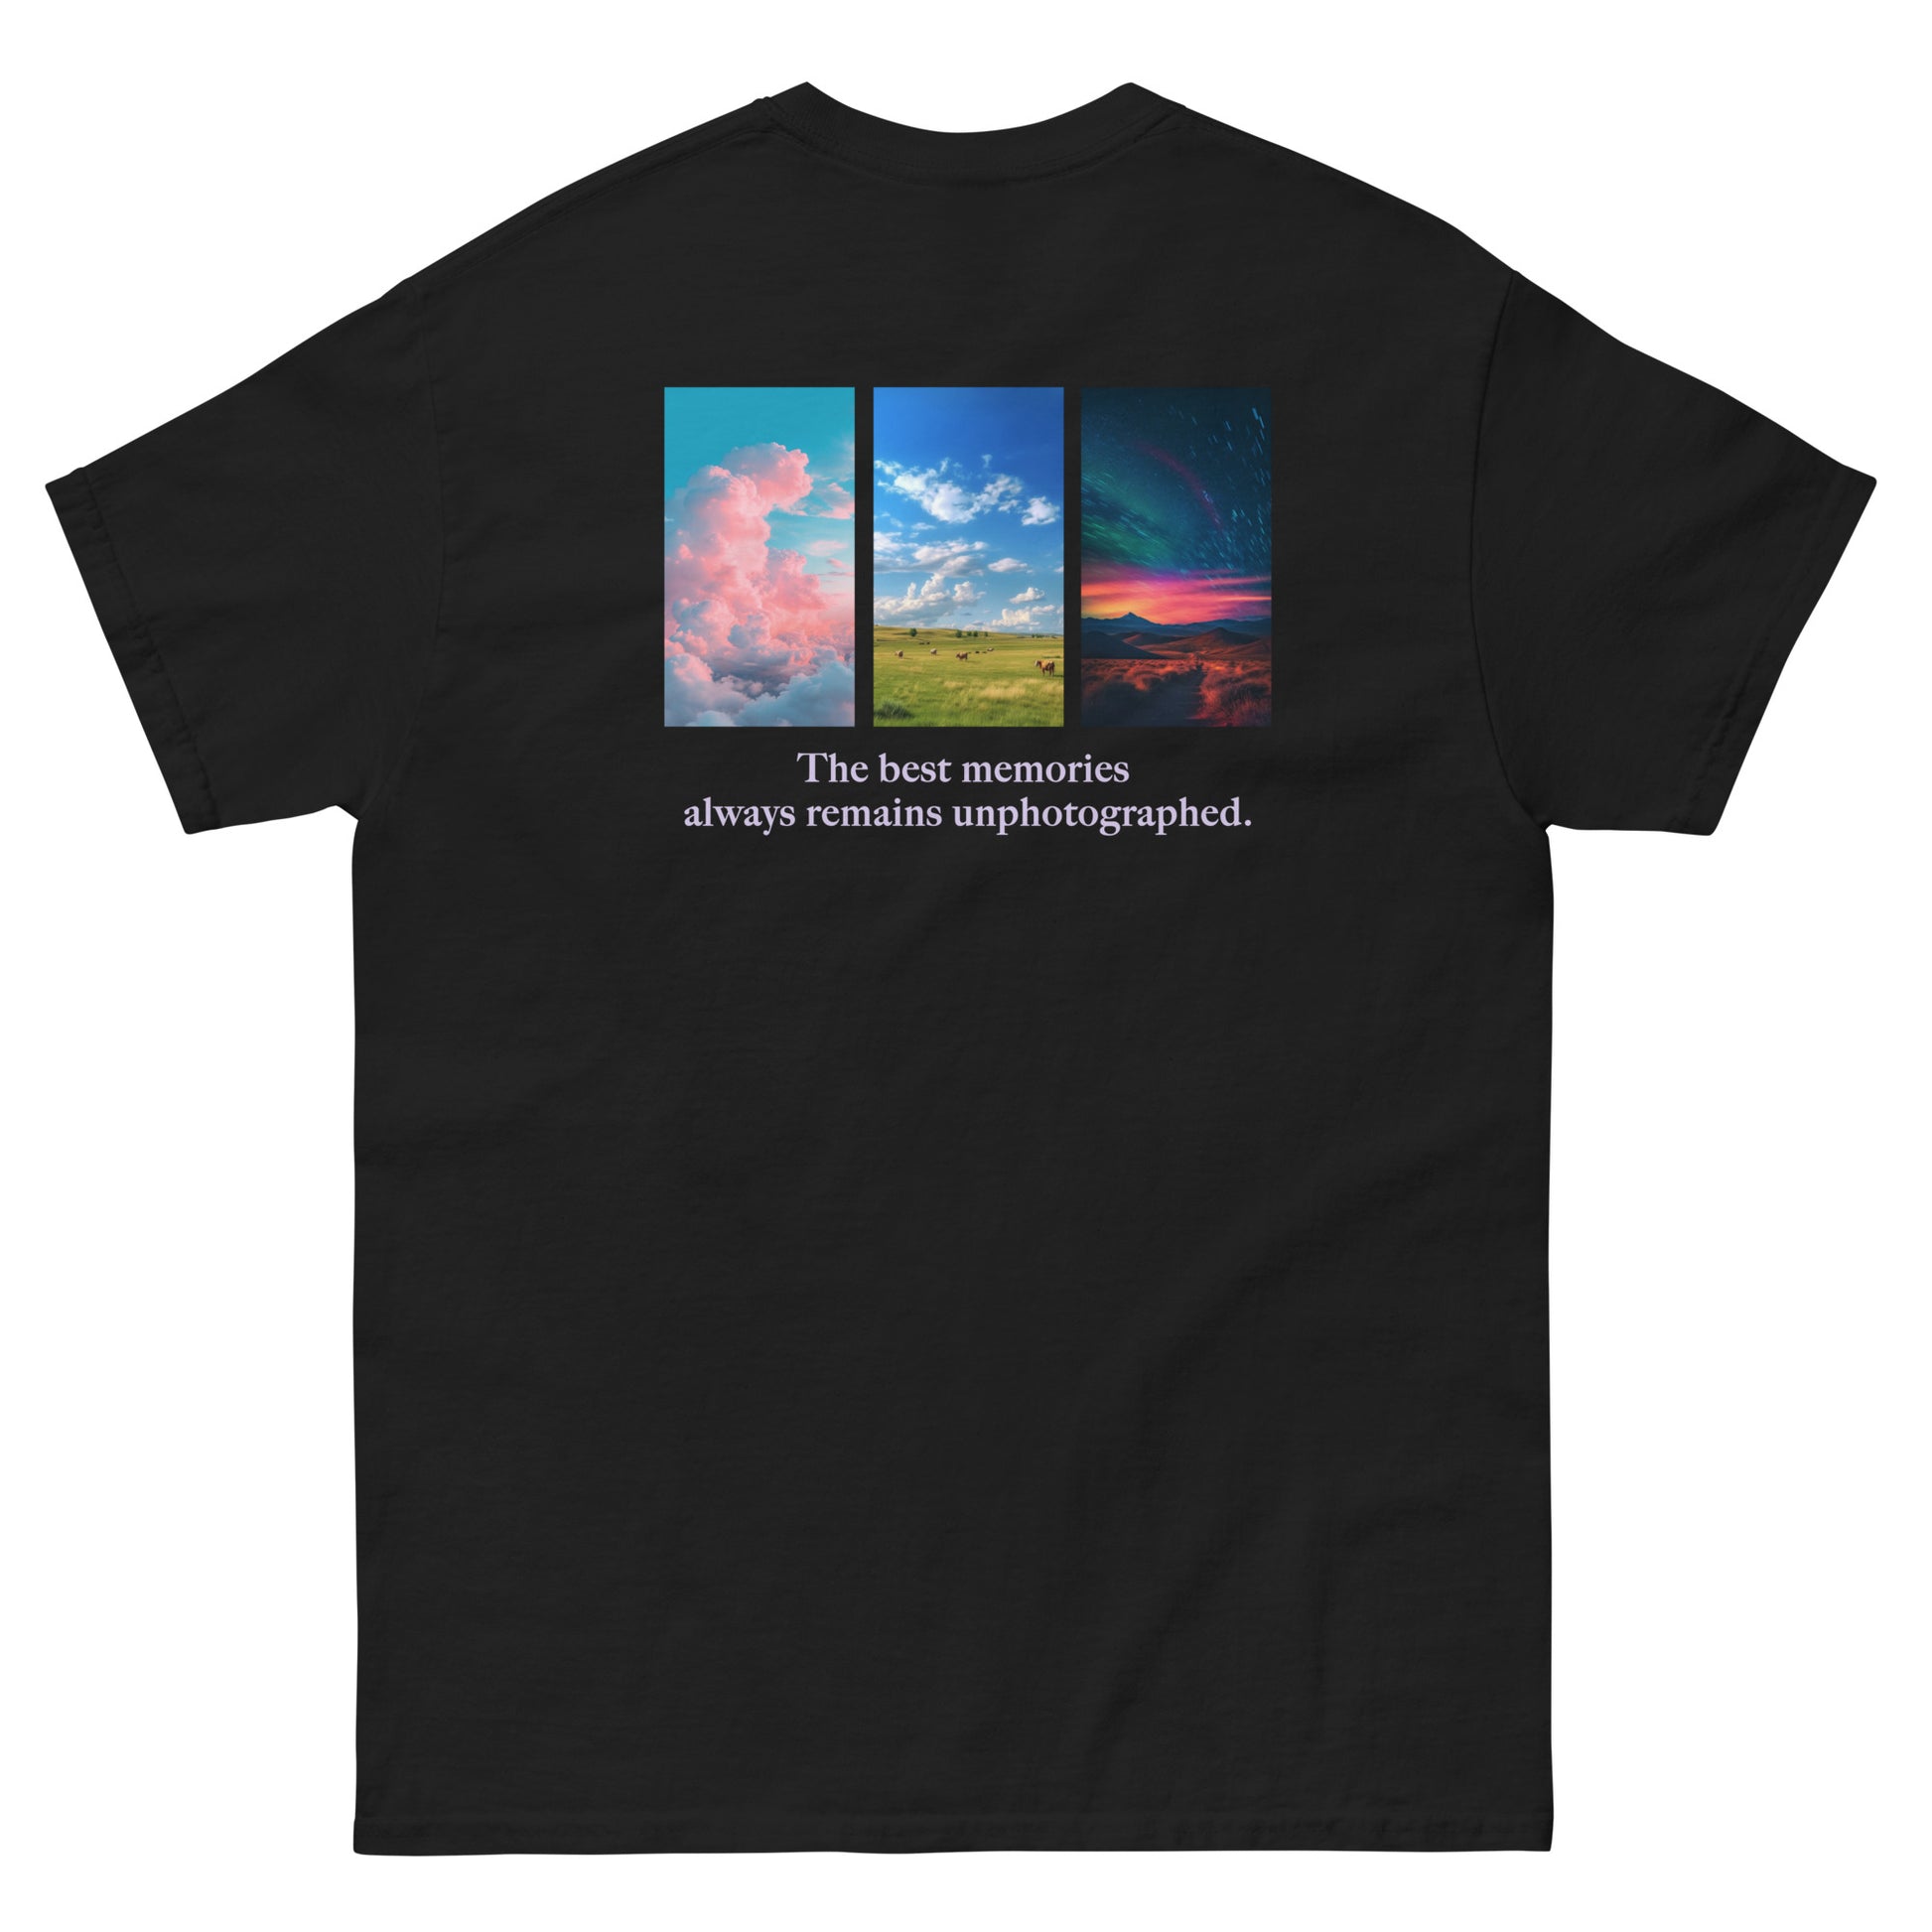 Black High Quality Tee - Front Design with "The best memories always remains unphotographed " print on left chest - Back Design with a Phrase "The best memories always remains unphotographed." print and three pictures of sky.